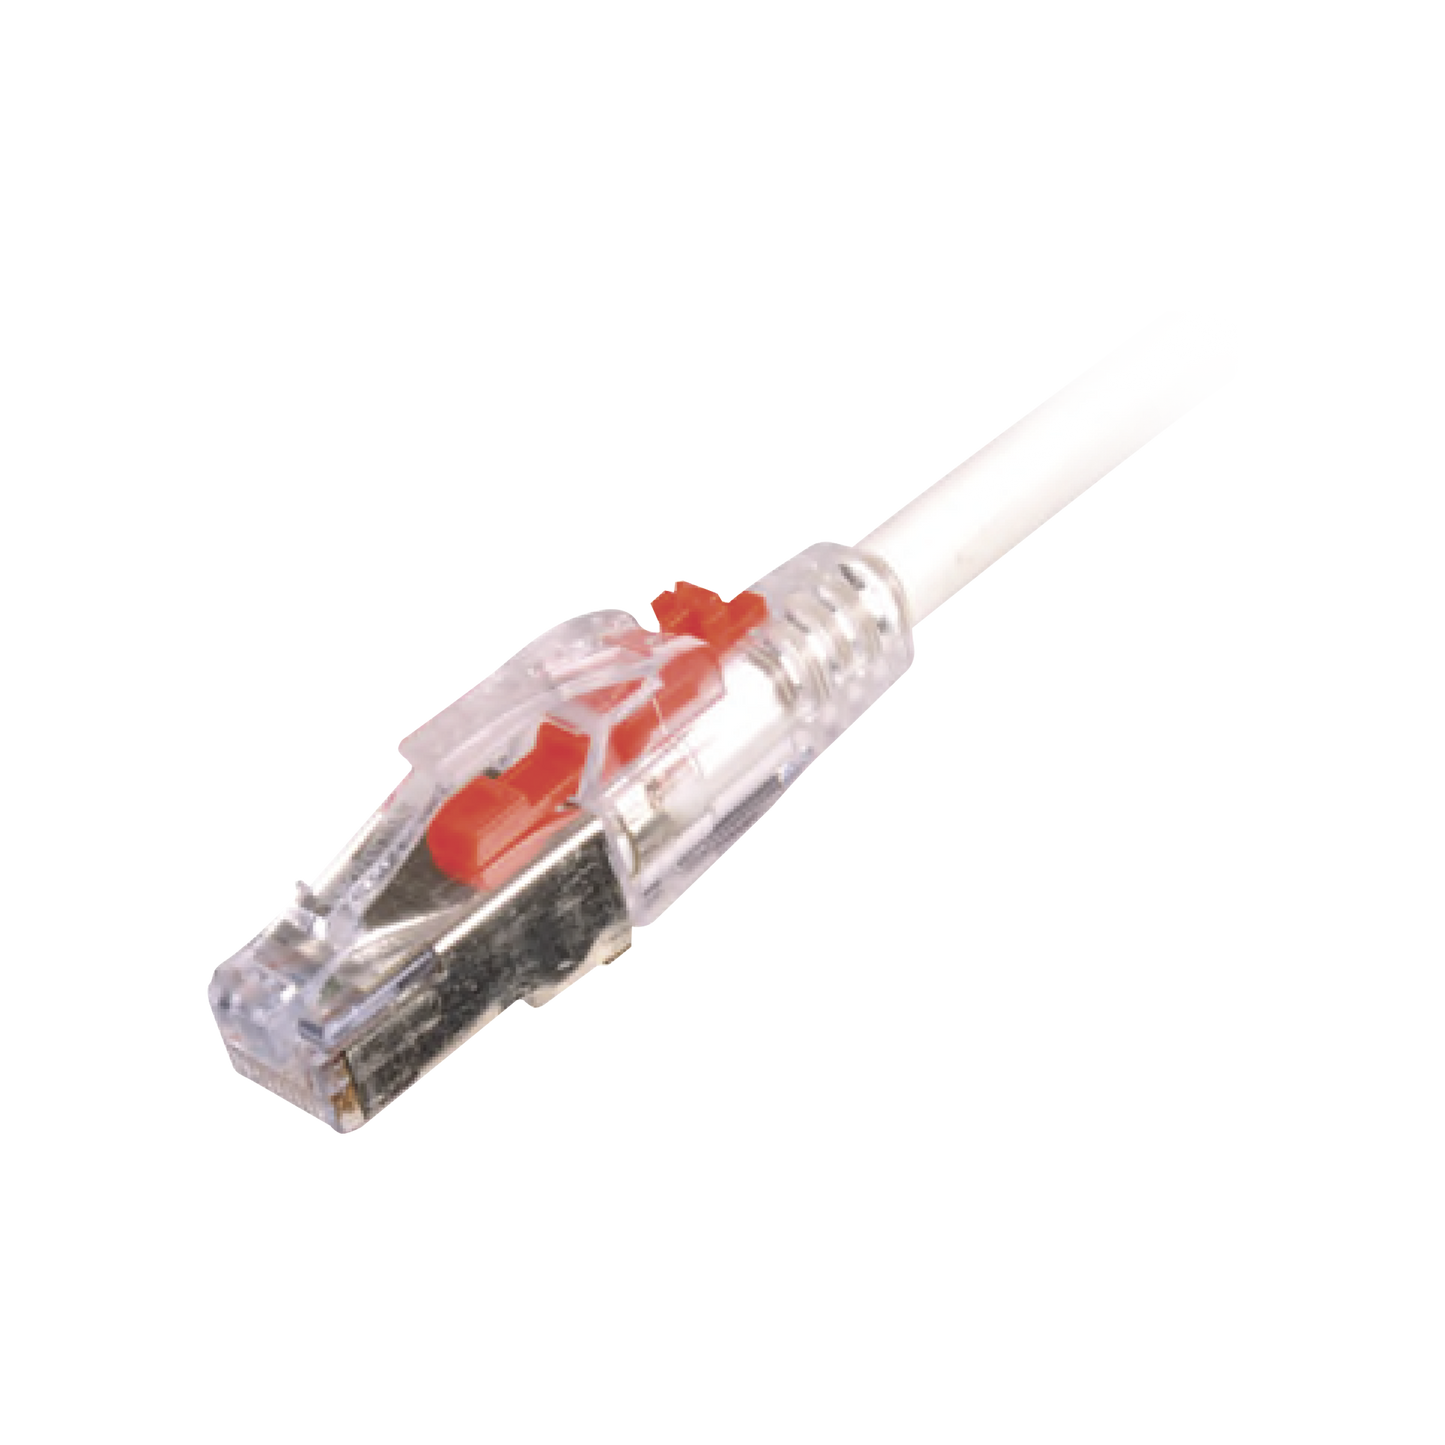 Patch Cord LockIT ™ Cat6A S/FTP, CM / LS0H, 7ft, Color Blanco, 28 AWG